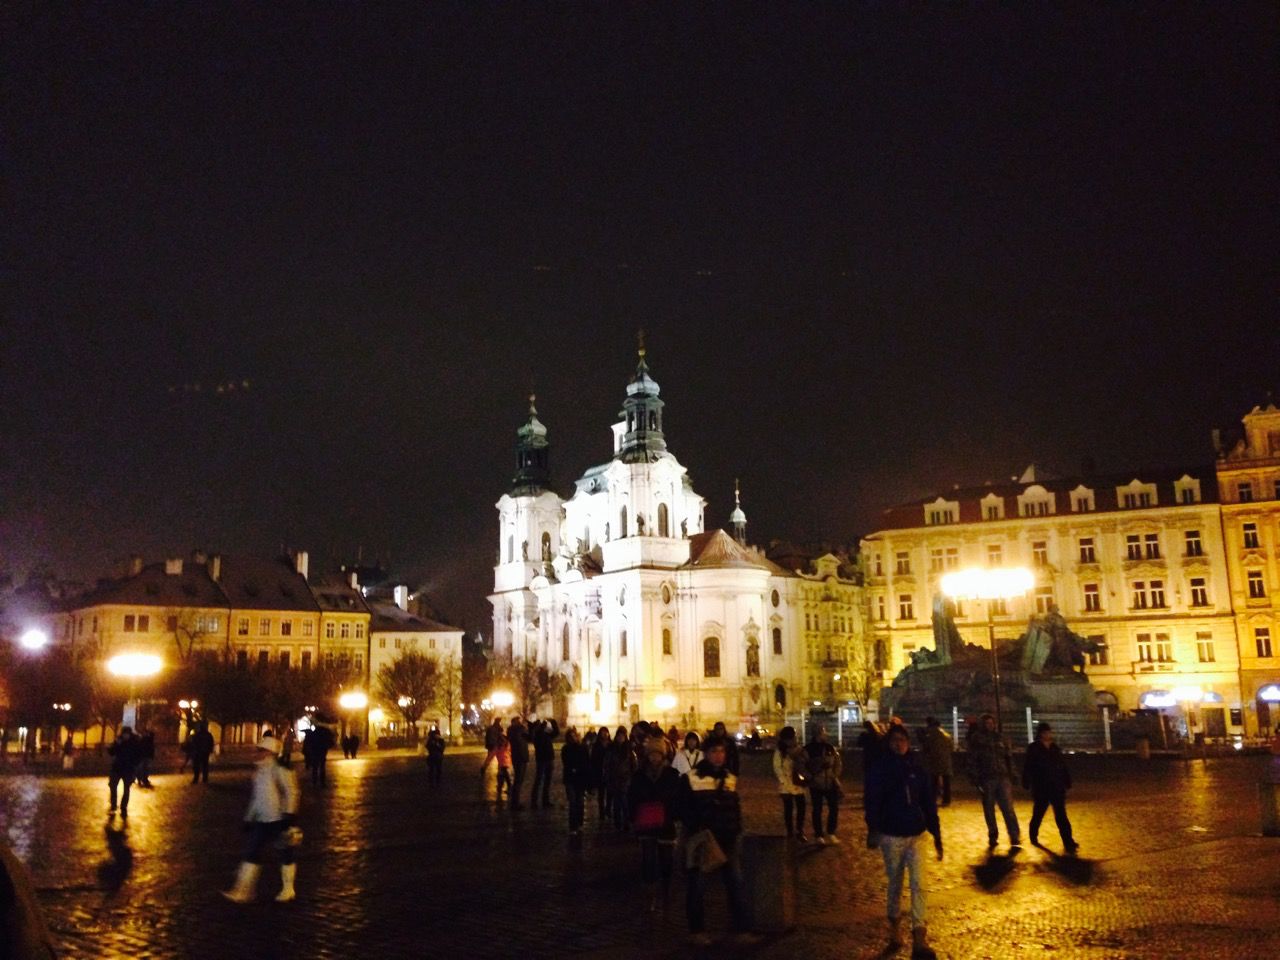 In Prague's Old Town Square